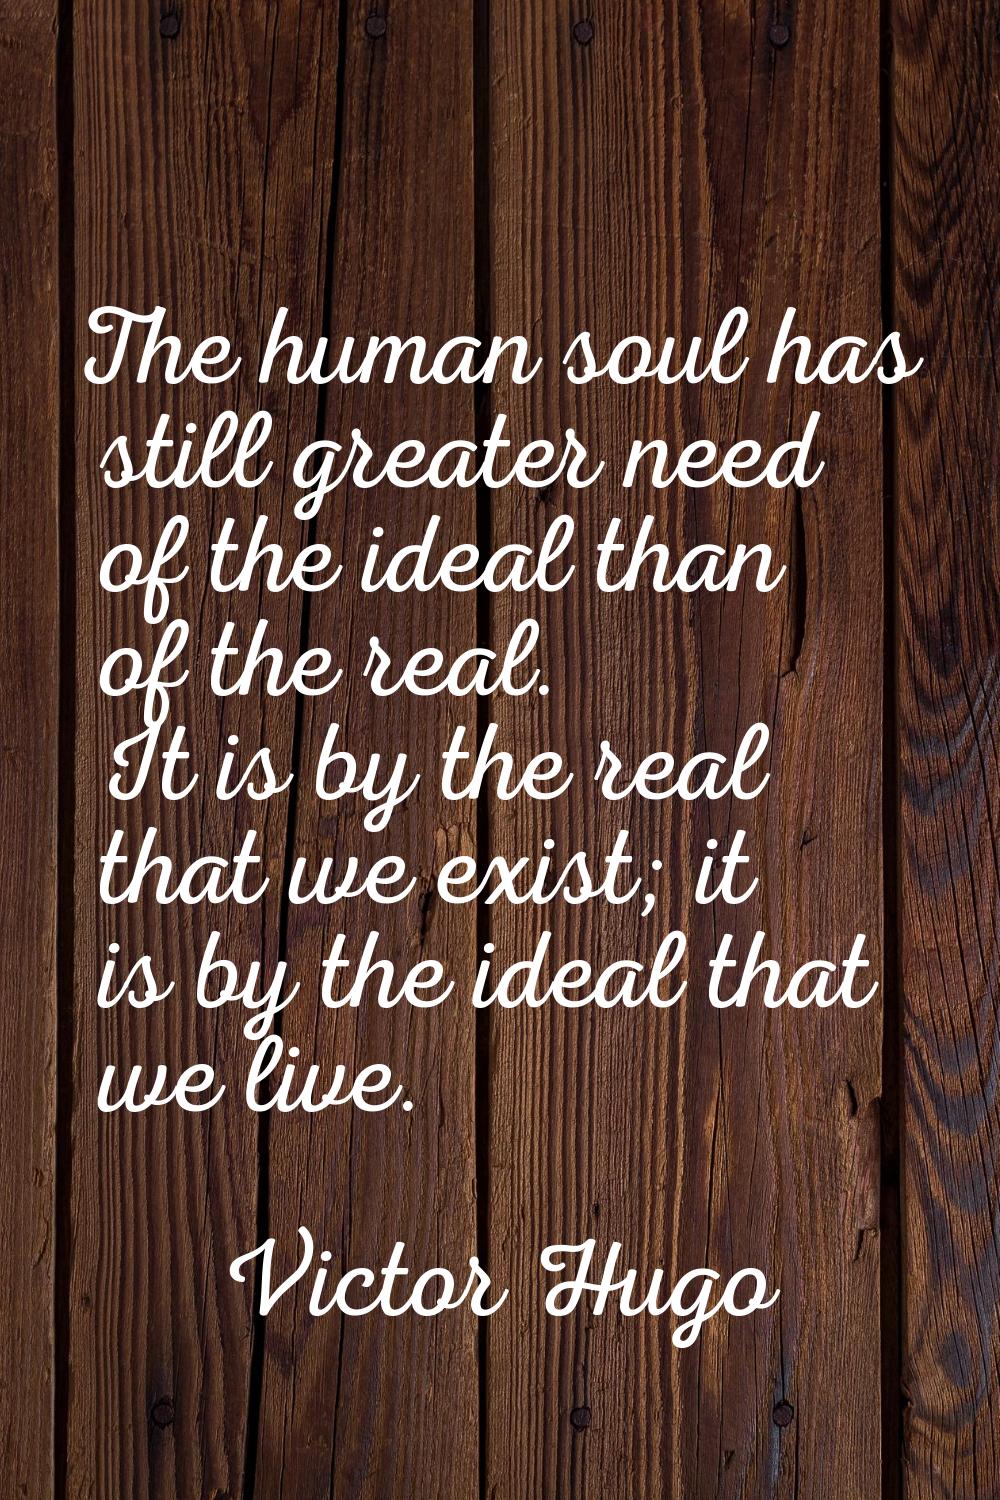 The human soul has still greater need of the ideal than of the real. It is by the real that we exis